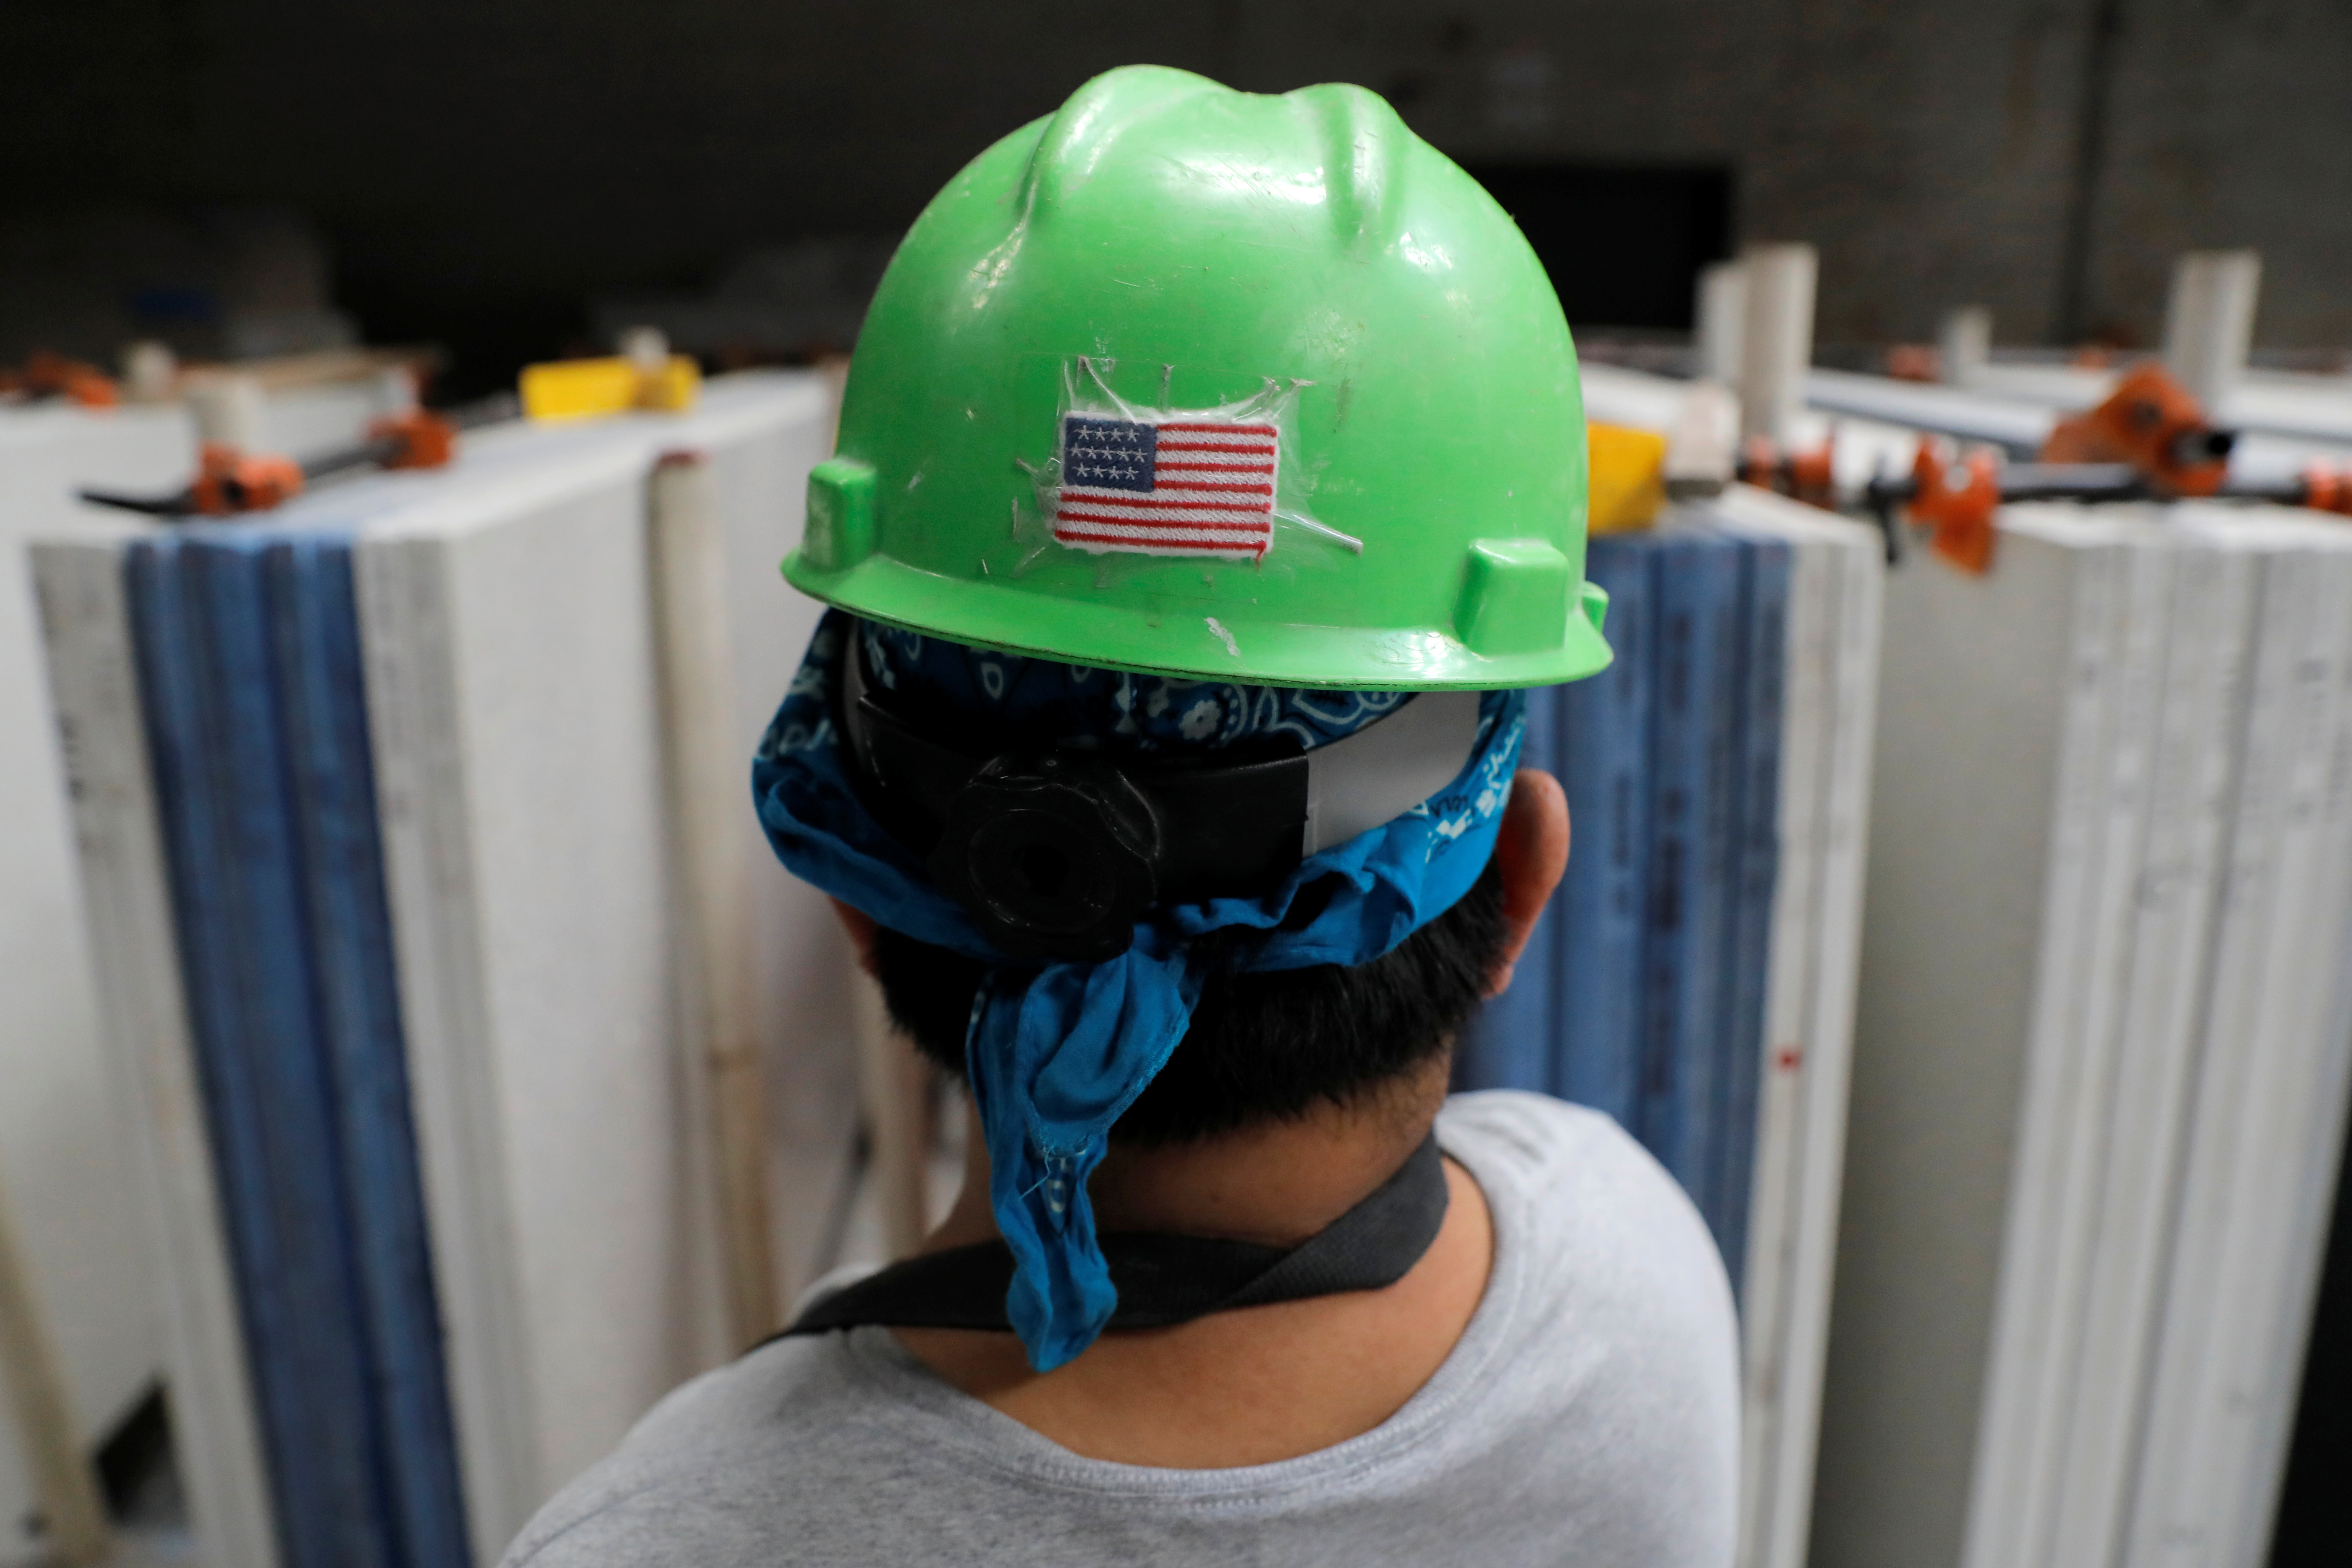 A U.S. flag is seen on the hard hat of a worker in the factory at IceStone, a manufacturer of recycled glass countertops and surfaces, in New York City, New York